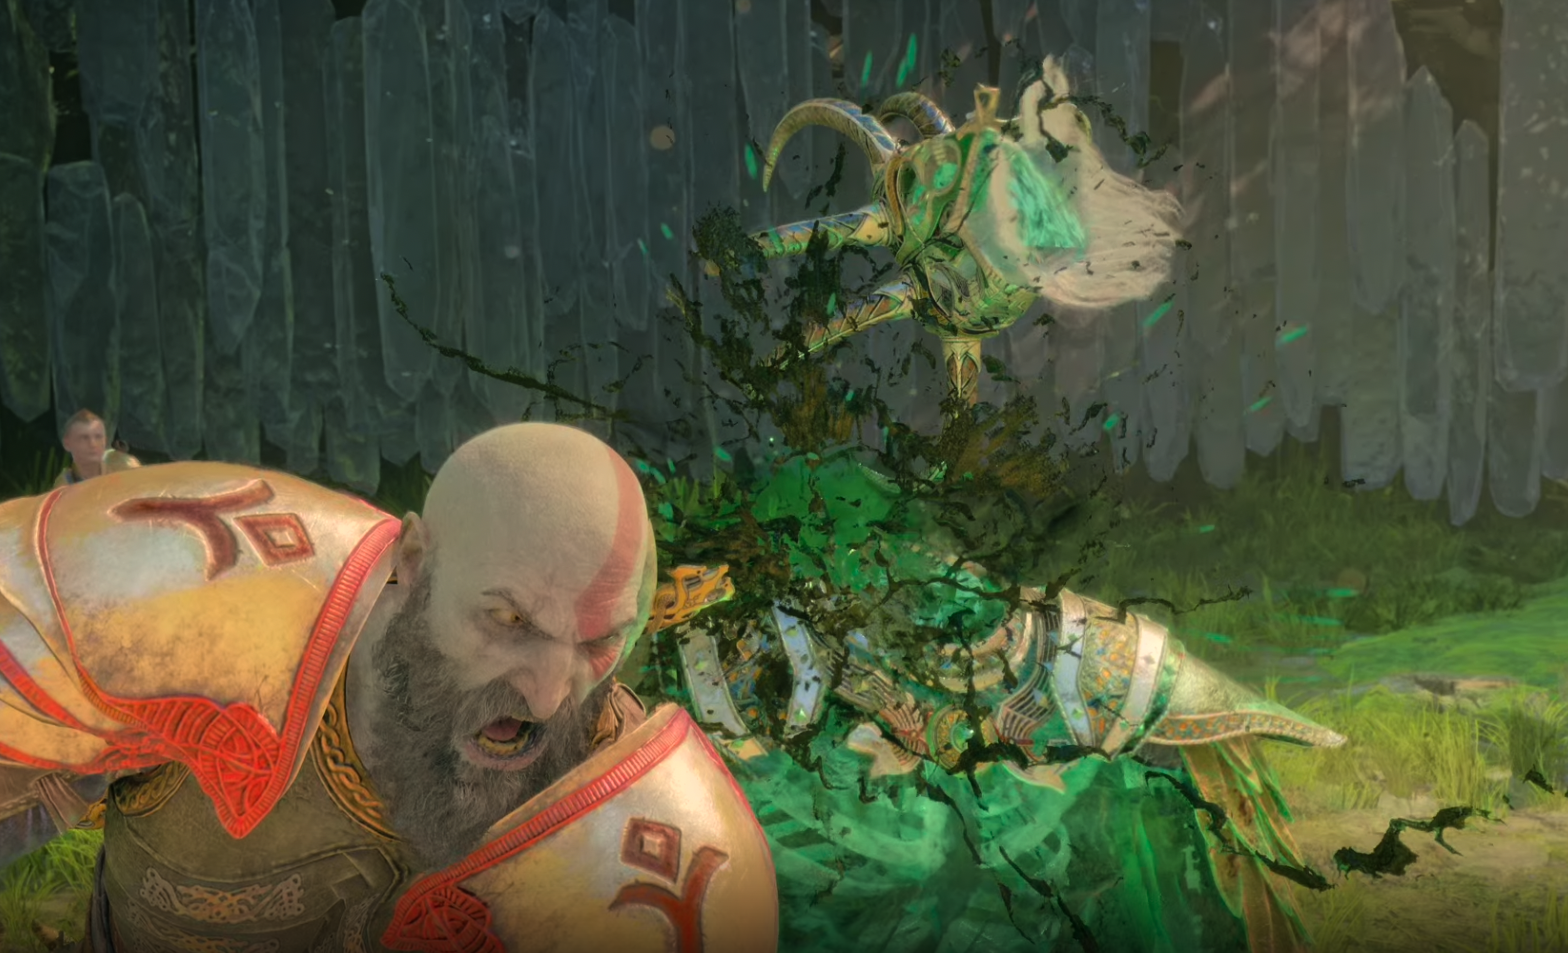 A bald man with a beard yells as a green skeleton with a crown is decapitated